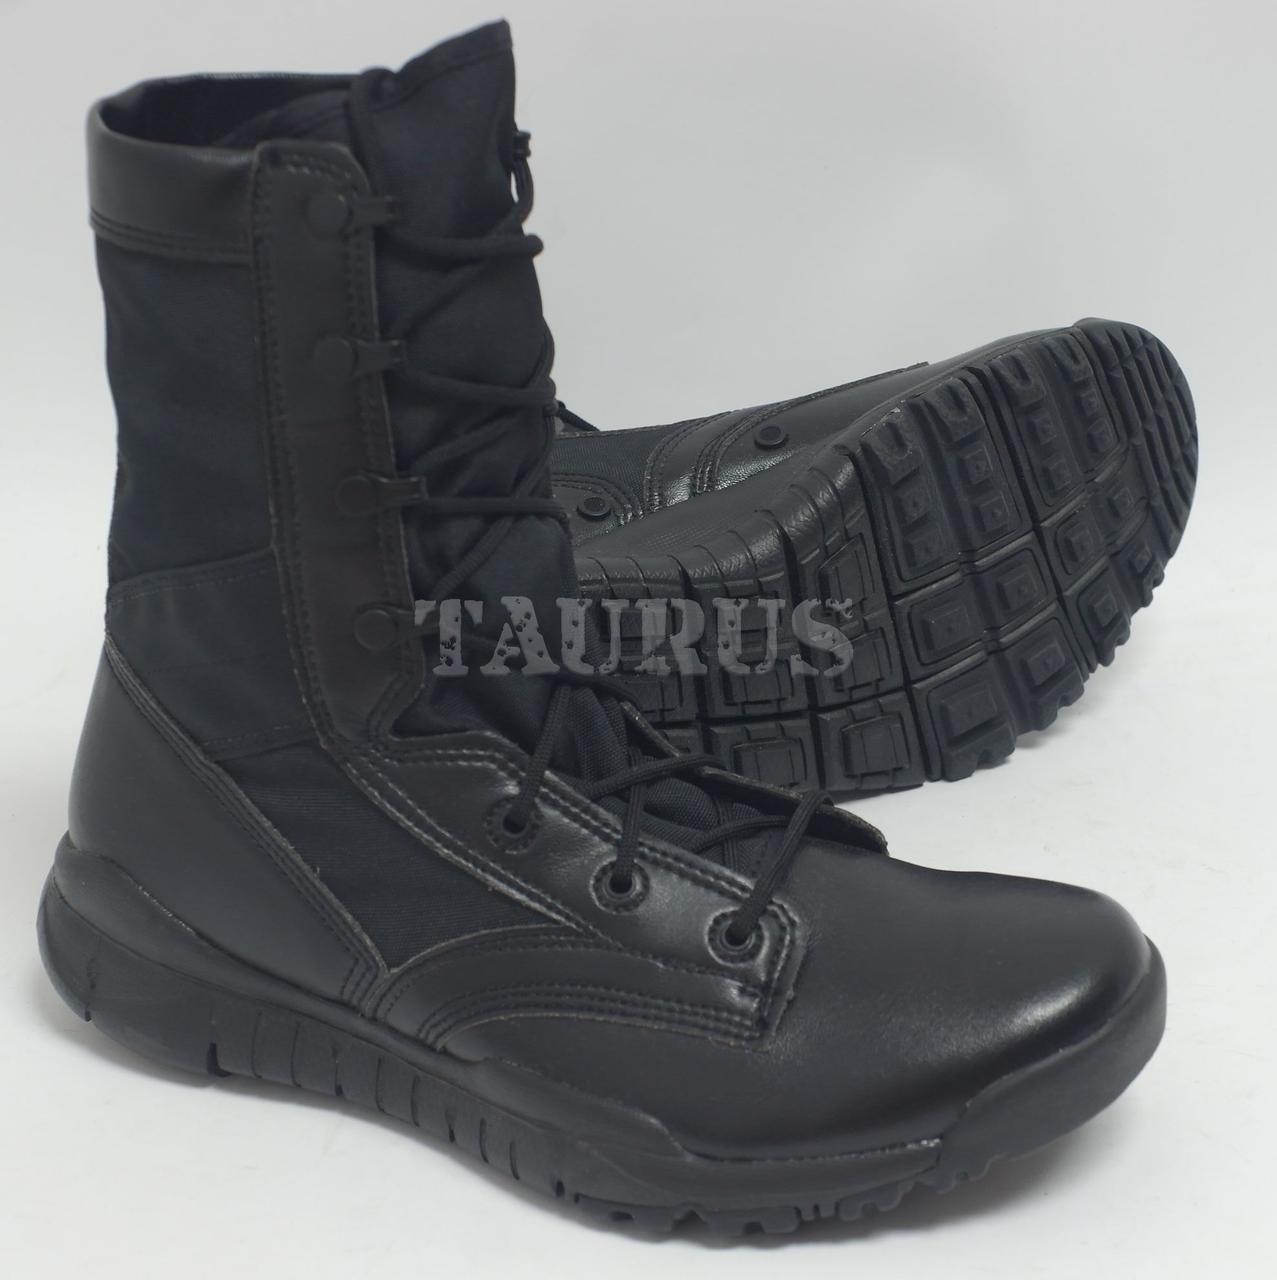 nike special field boots 8